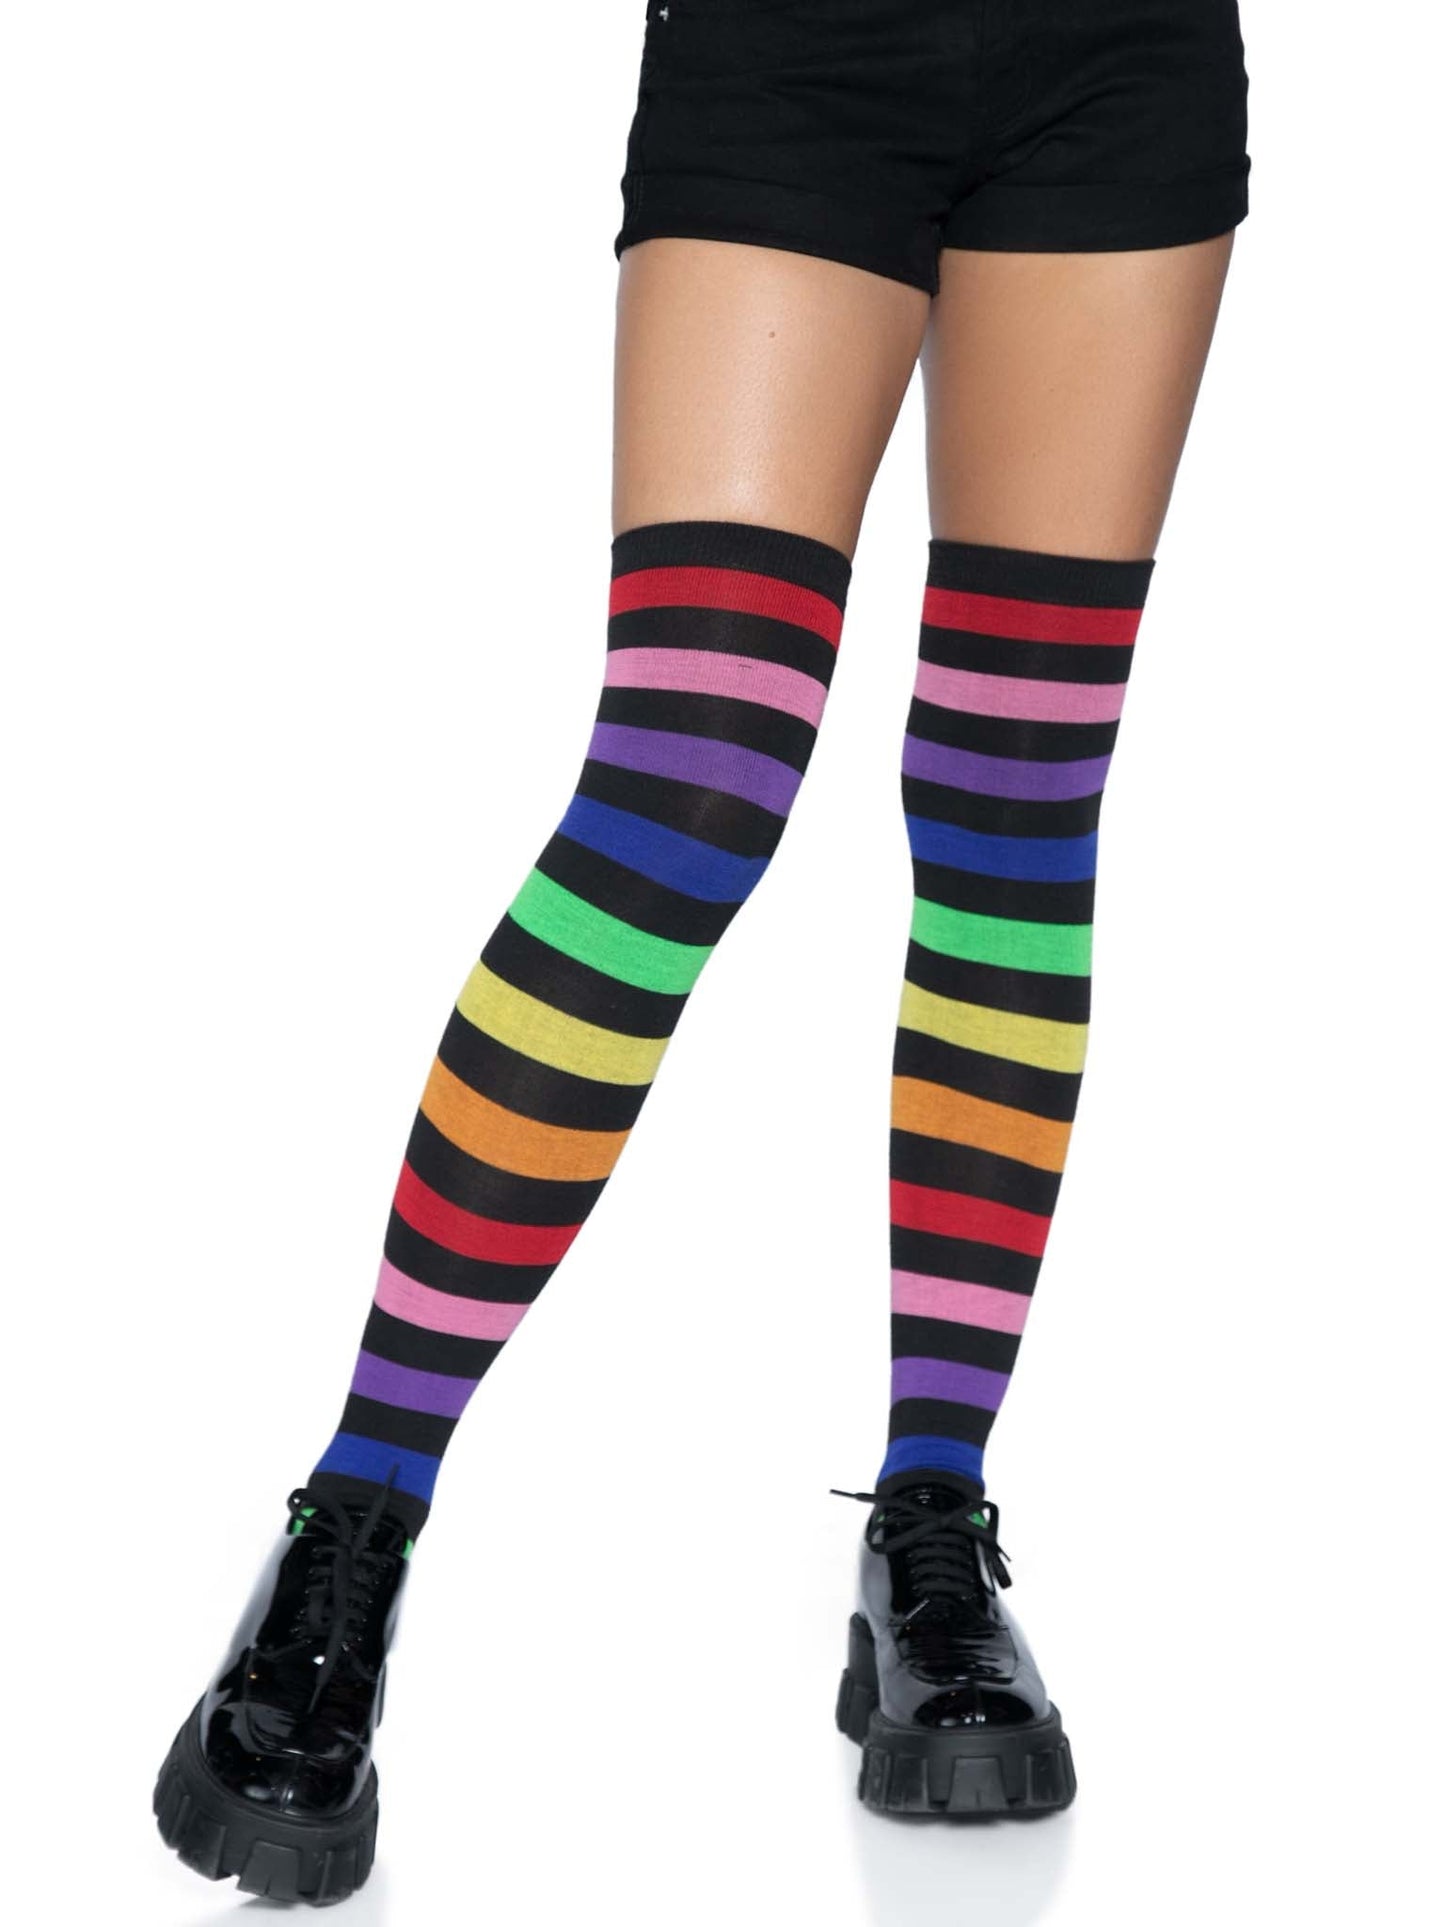 Aurora Rainbow Over The Knee Rainbow Socks on model wearing black shoes and shorts, front view.